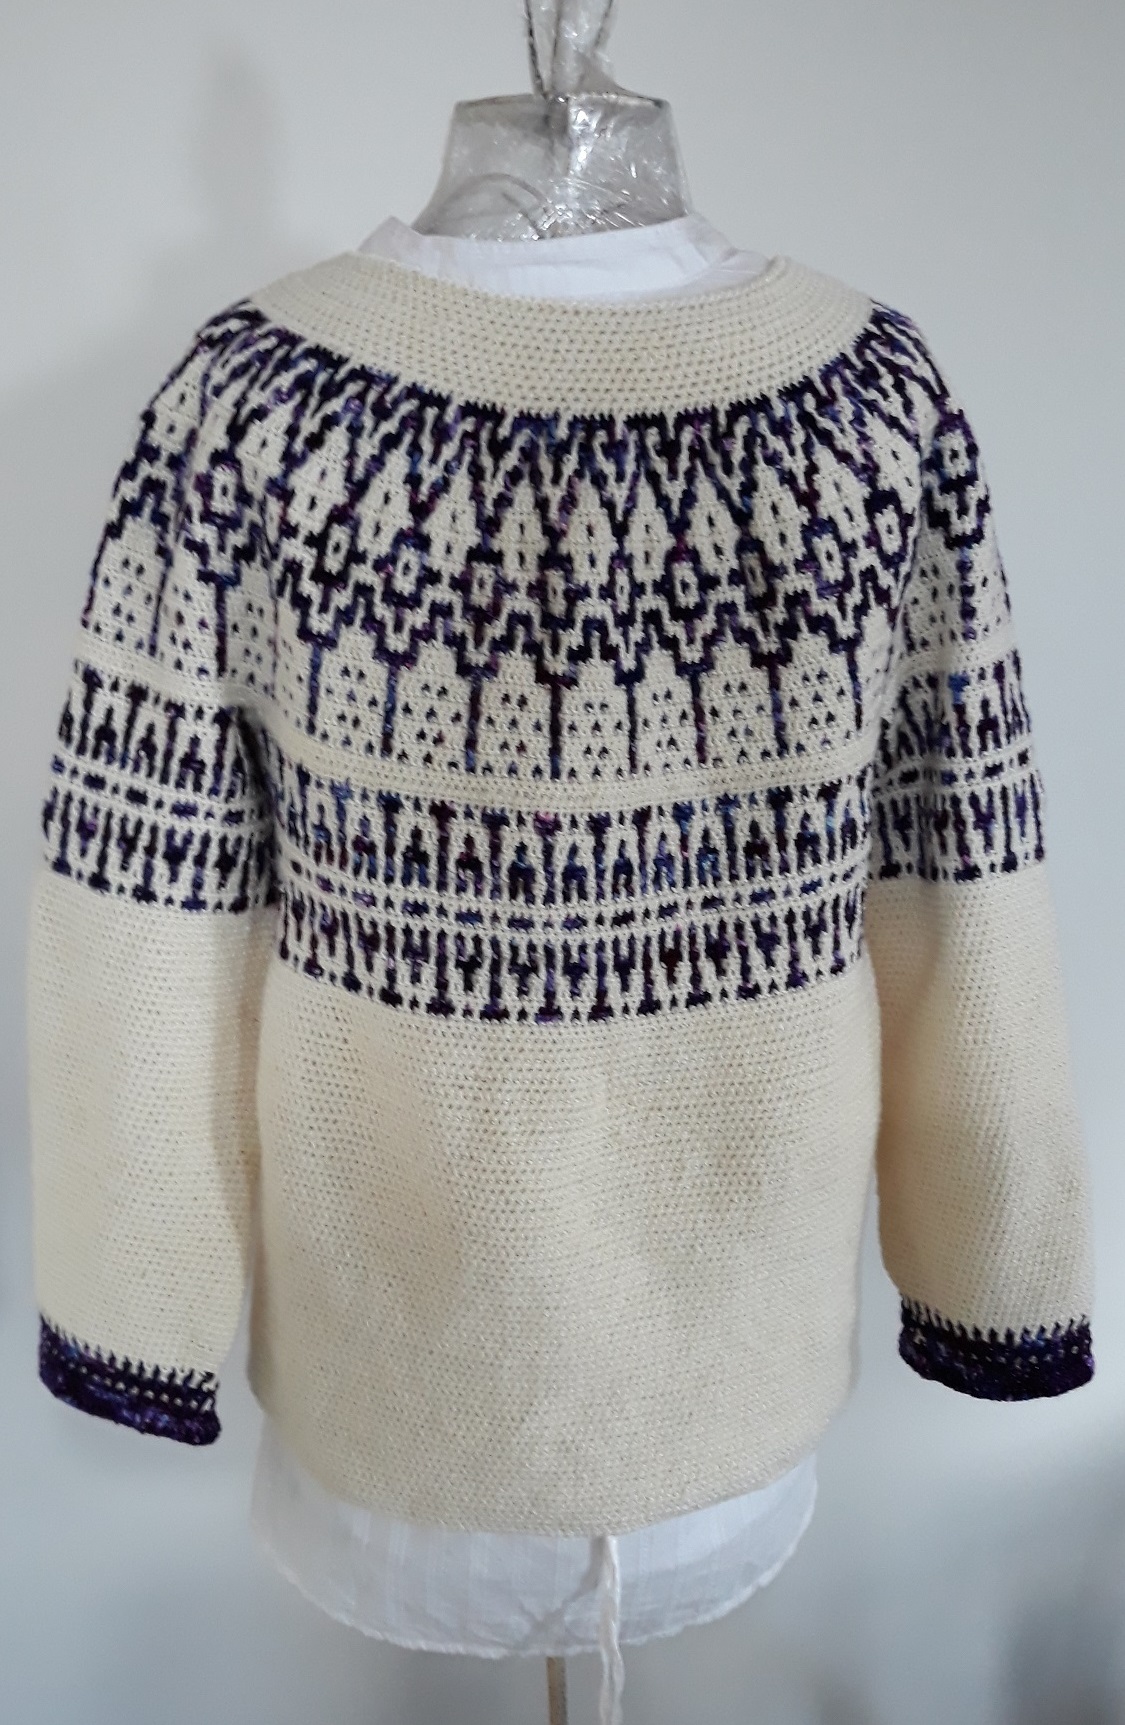 Winter is here… preparing with a Mosaic cardigan! – Handmade By Anette